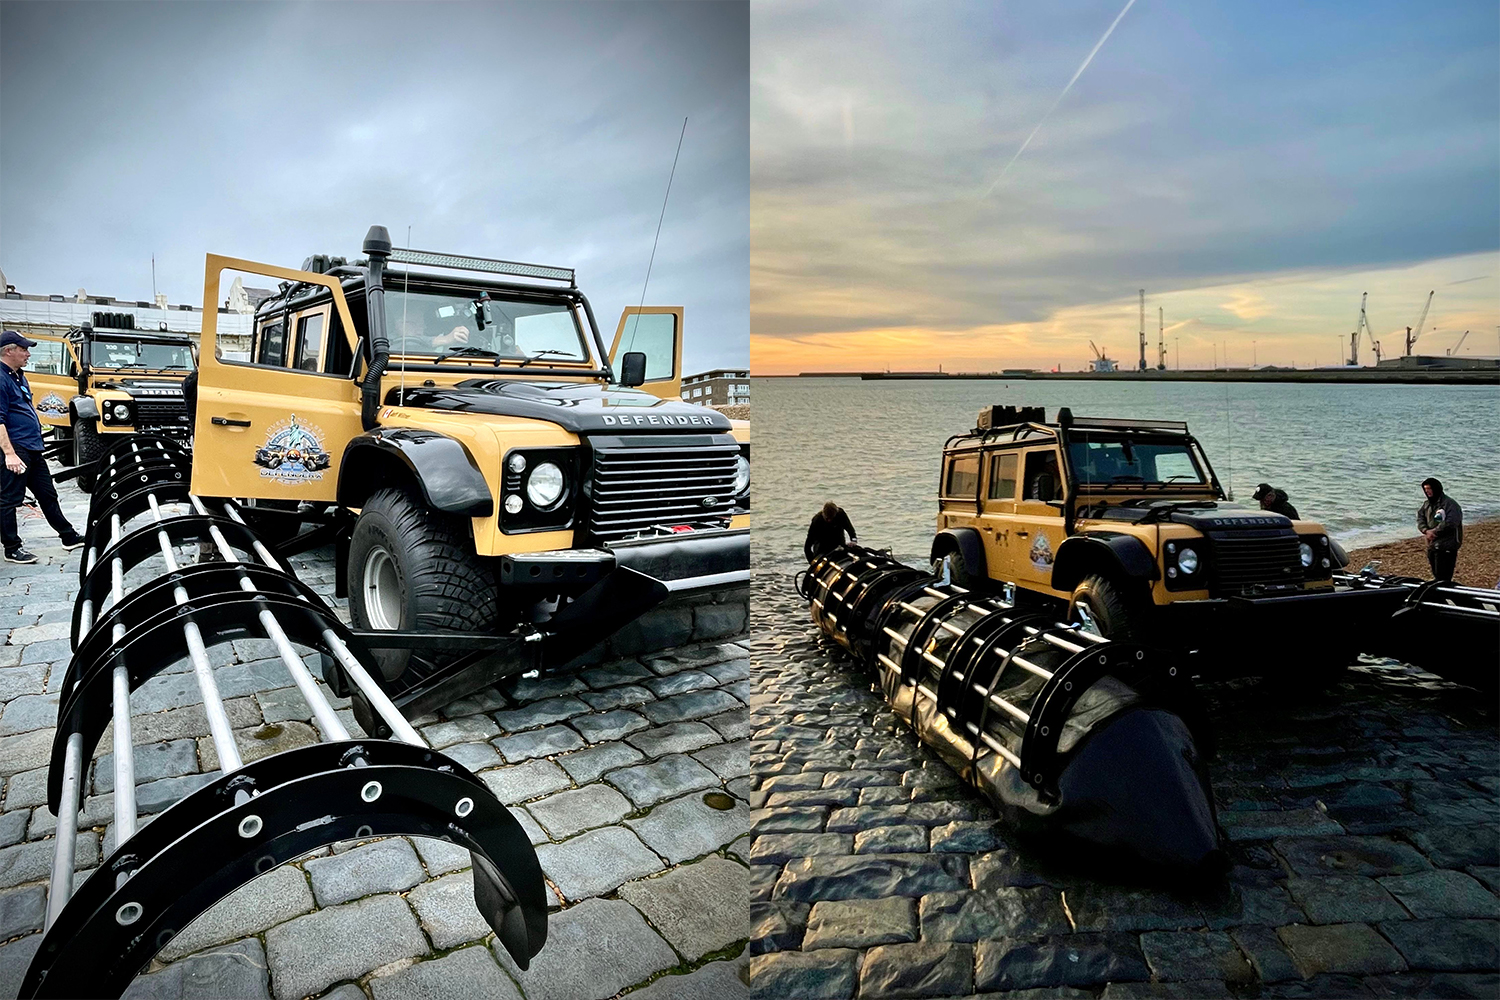 The Land Rover Defender 110s from the DefenderX expedition, attempting to go from London to New York, with their proprietary pontoon flotation devices. Here they attempt to cross the English Channel in October 2021.